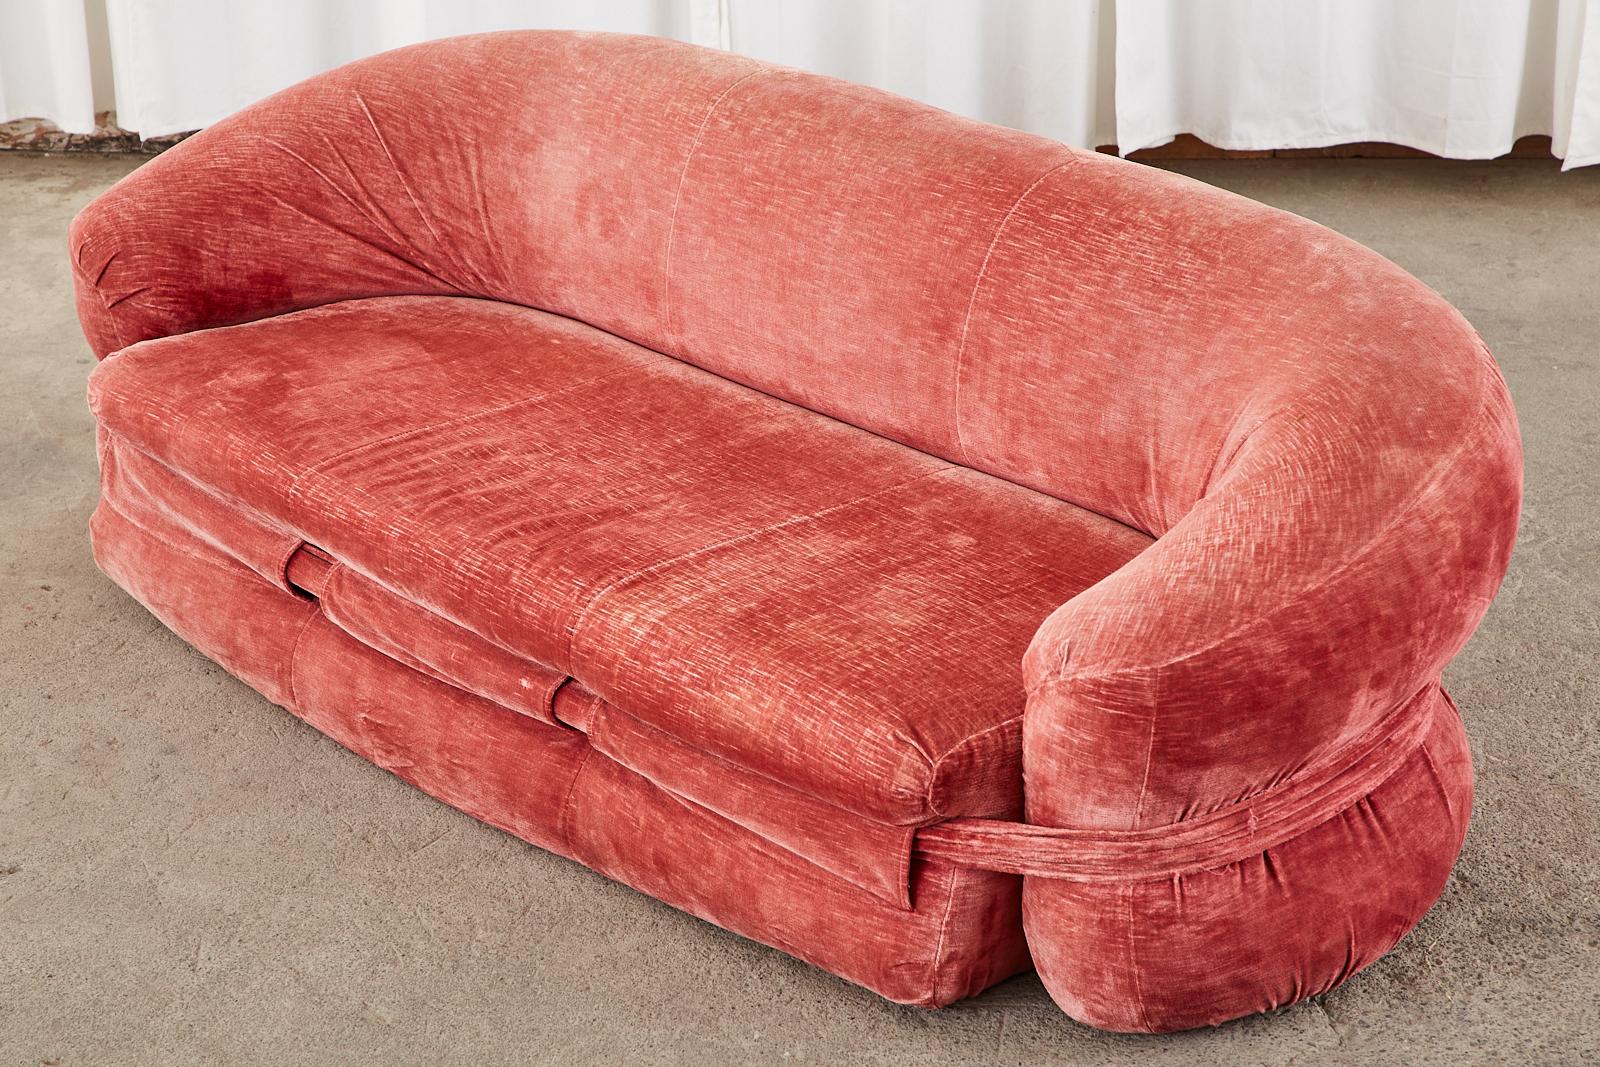 Spectacular Mid-Century Modern sofa designed by Italian architect Adriano Piazzesi for Harvey Probber Inc. Burger bun is a whimsical kidney shaped form design sofa crafted from a steel frame molded with polyurethane foam to create the overstuffed